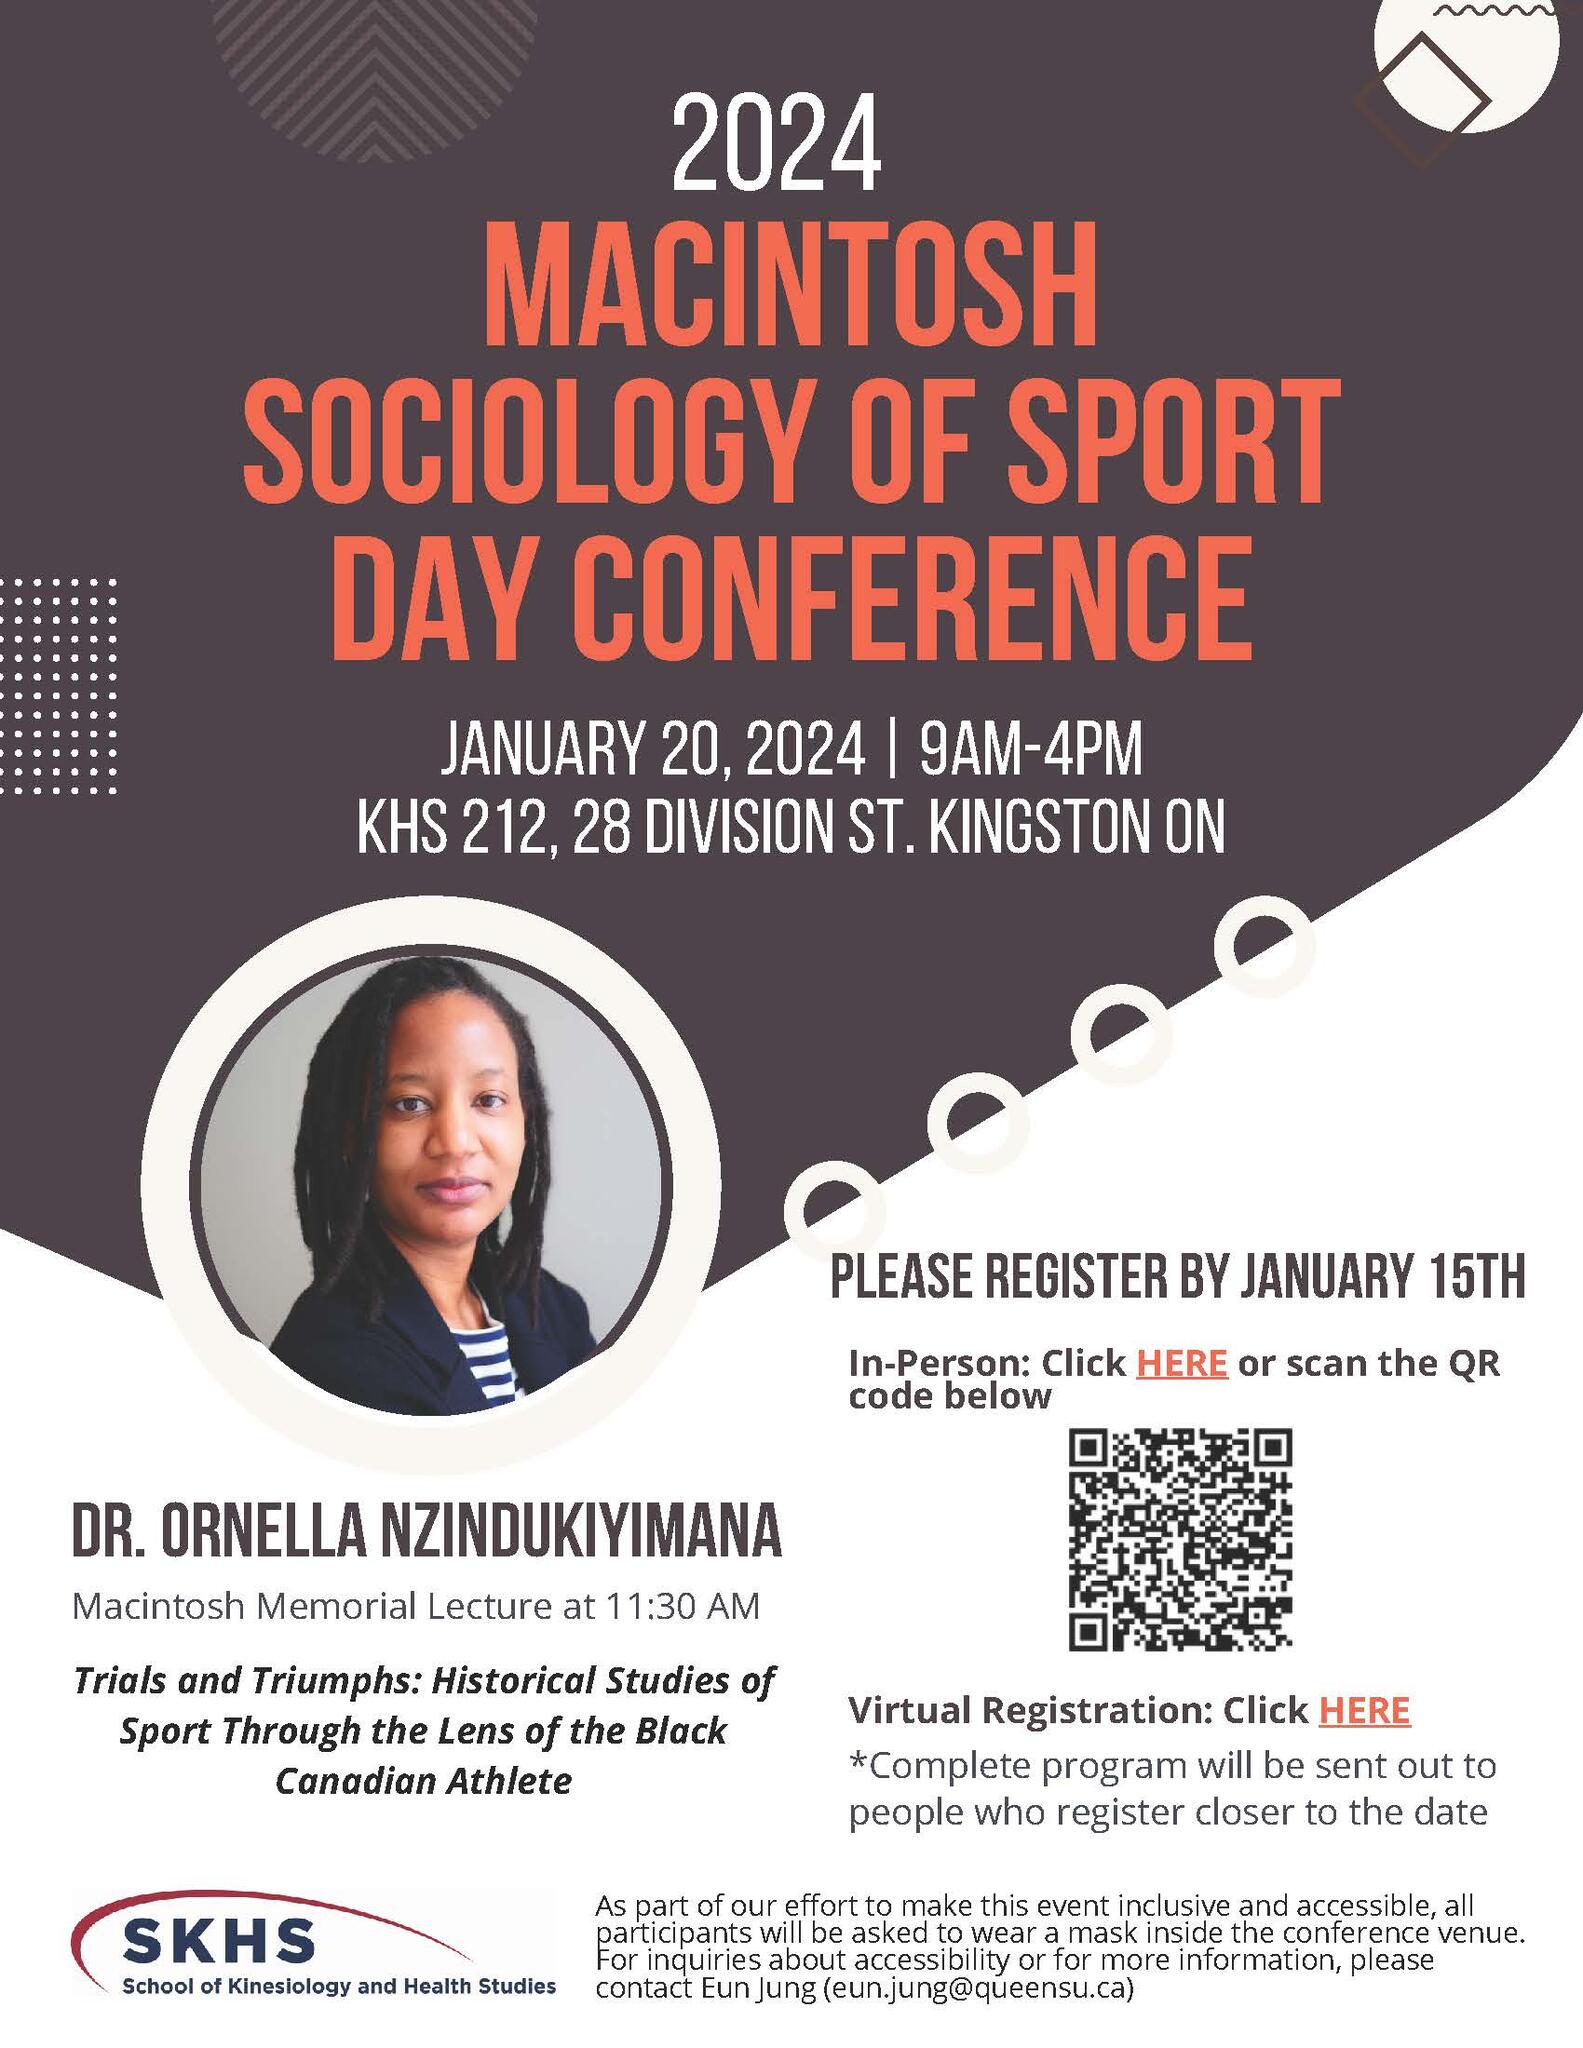 20th Annual Macintosh Sociology of Sport Day Conference